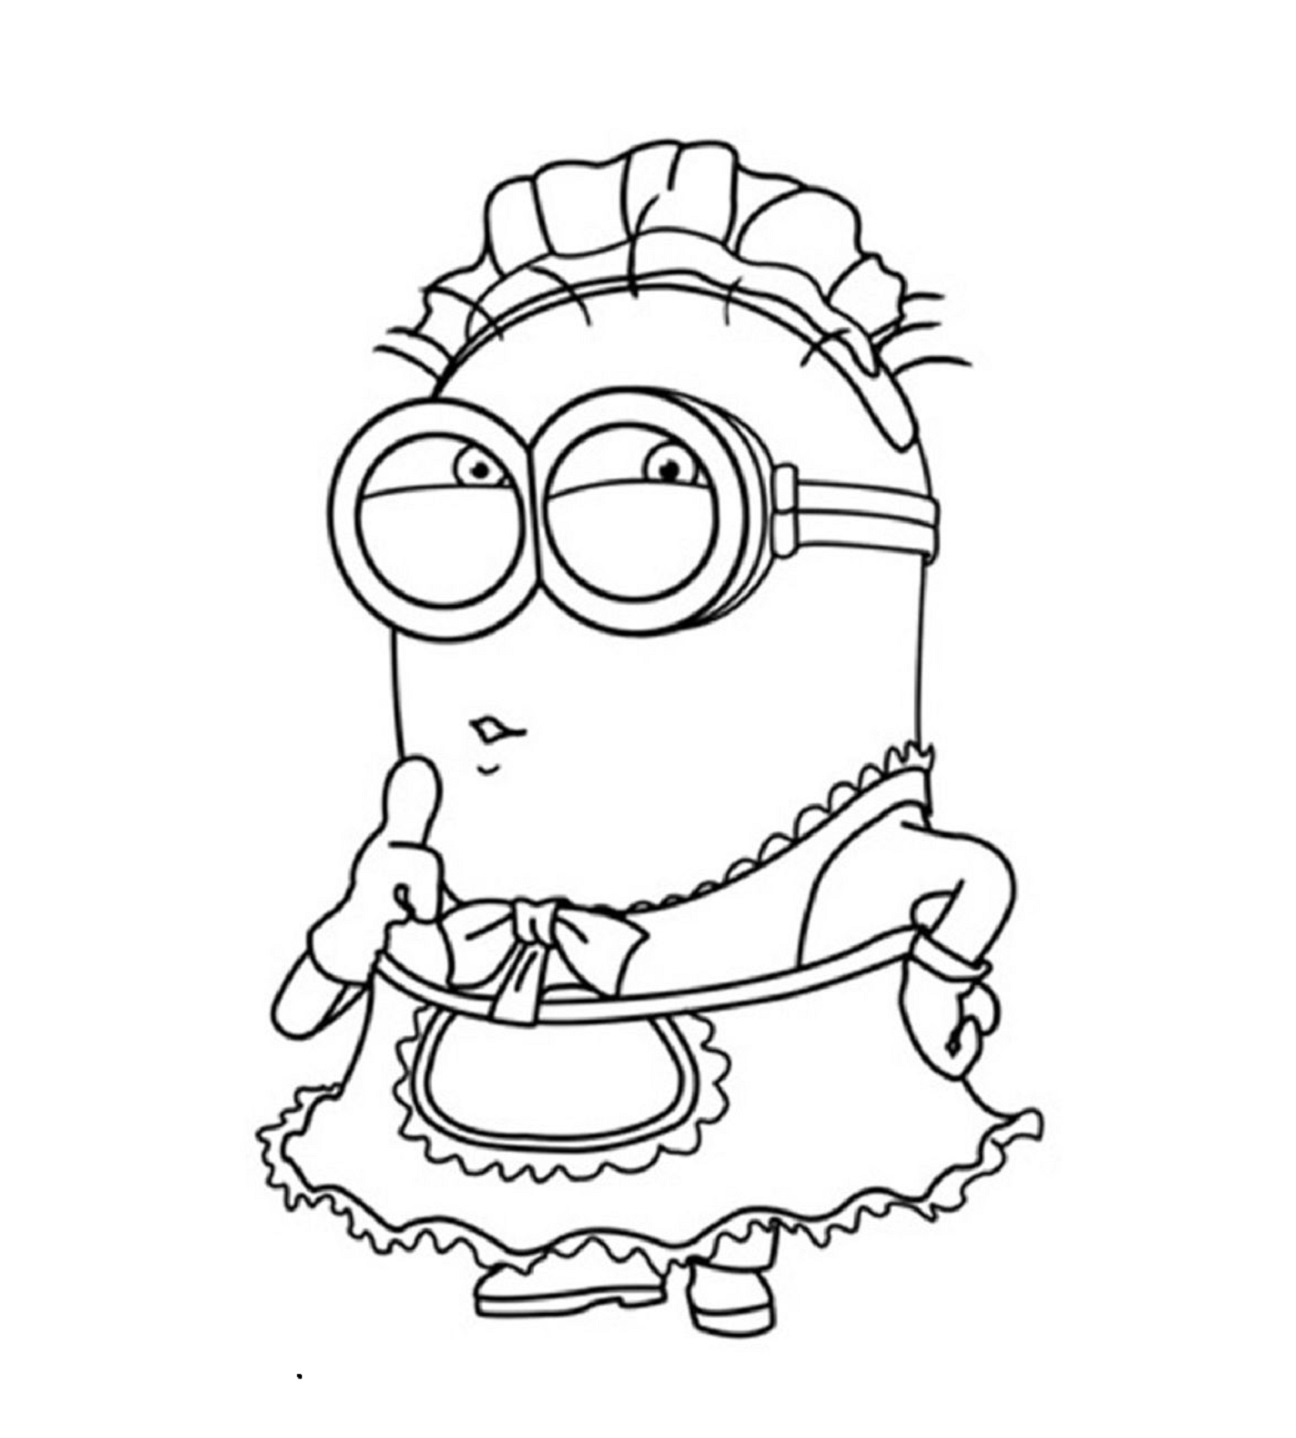 Minion as Maid, thinking Coloring Page Printable for Kids, Free, Simple and Easy, as PDF